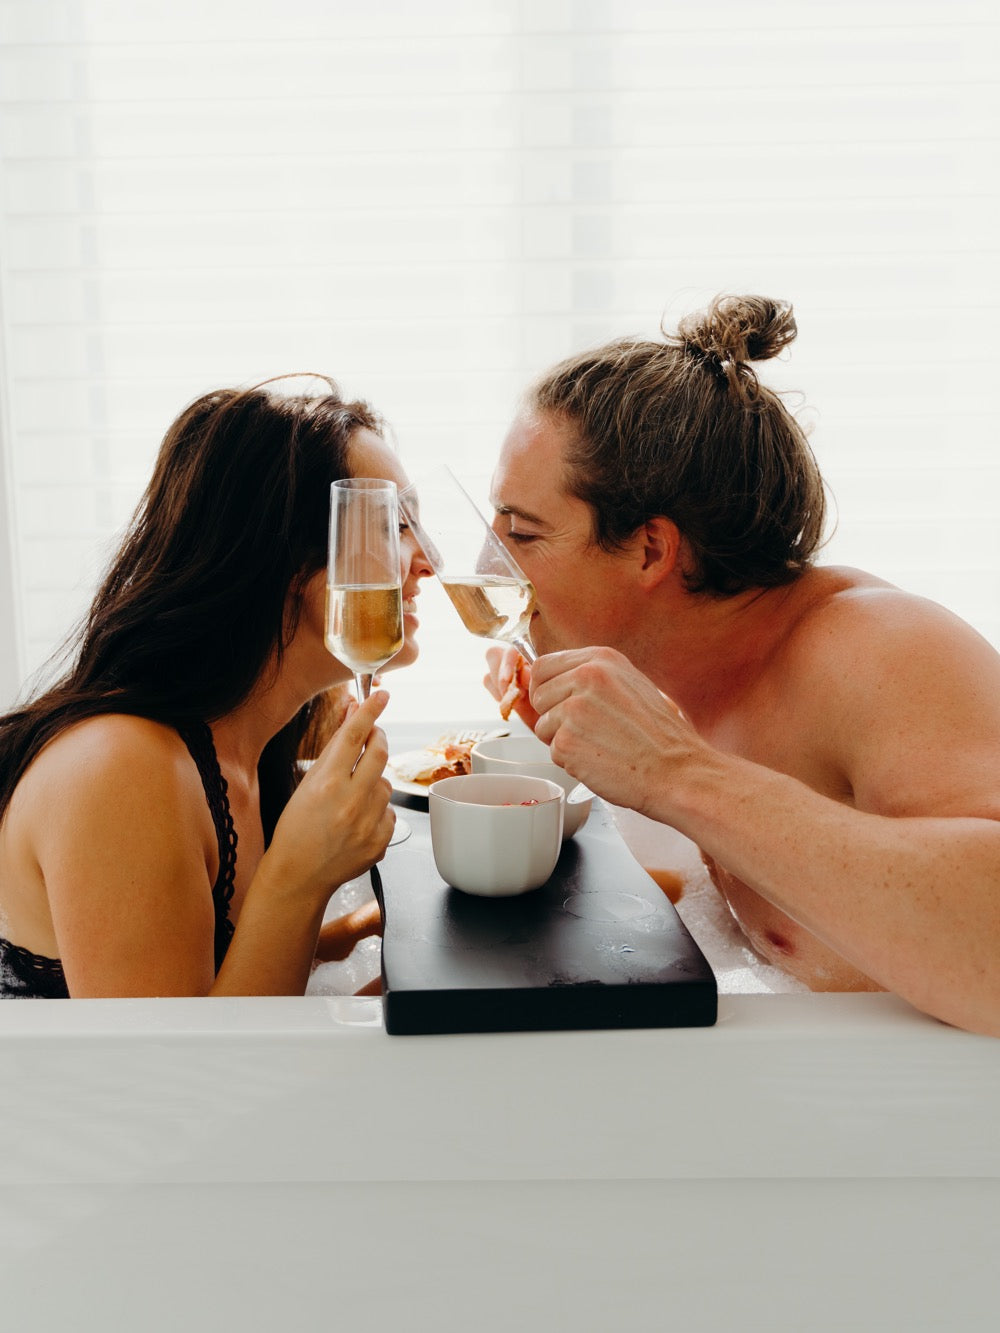 50 Items for Your Sexual Bucket List: Couple sharing food and champagne in bath tub.